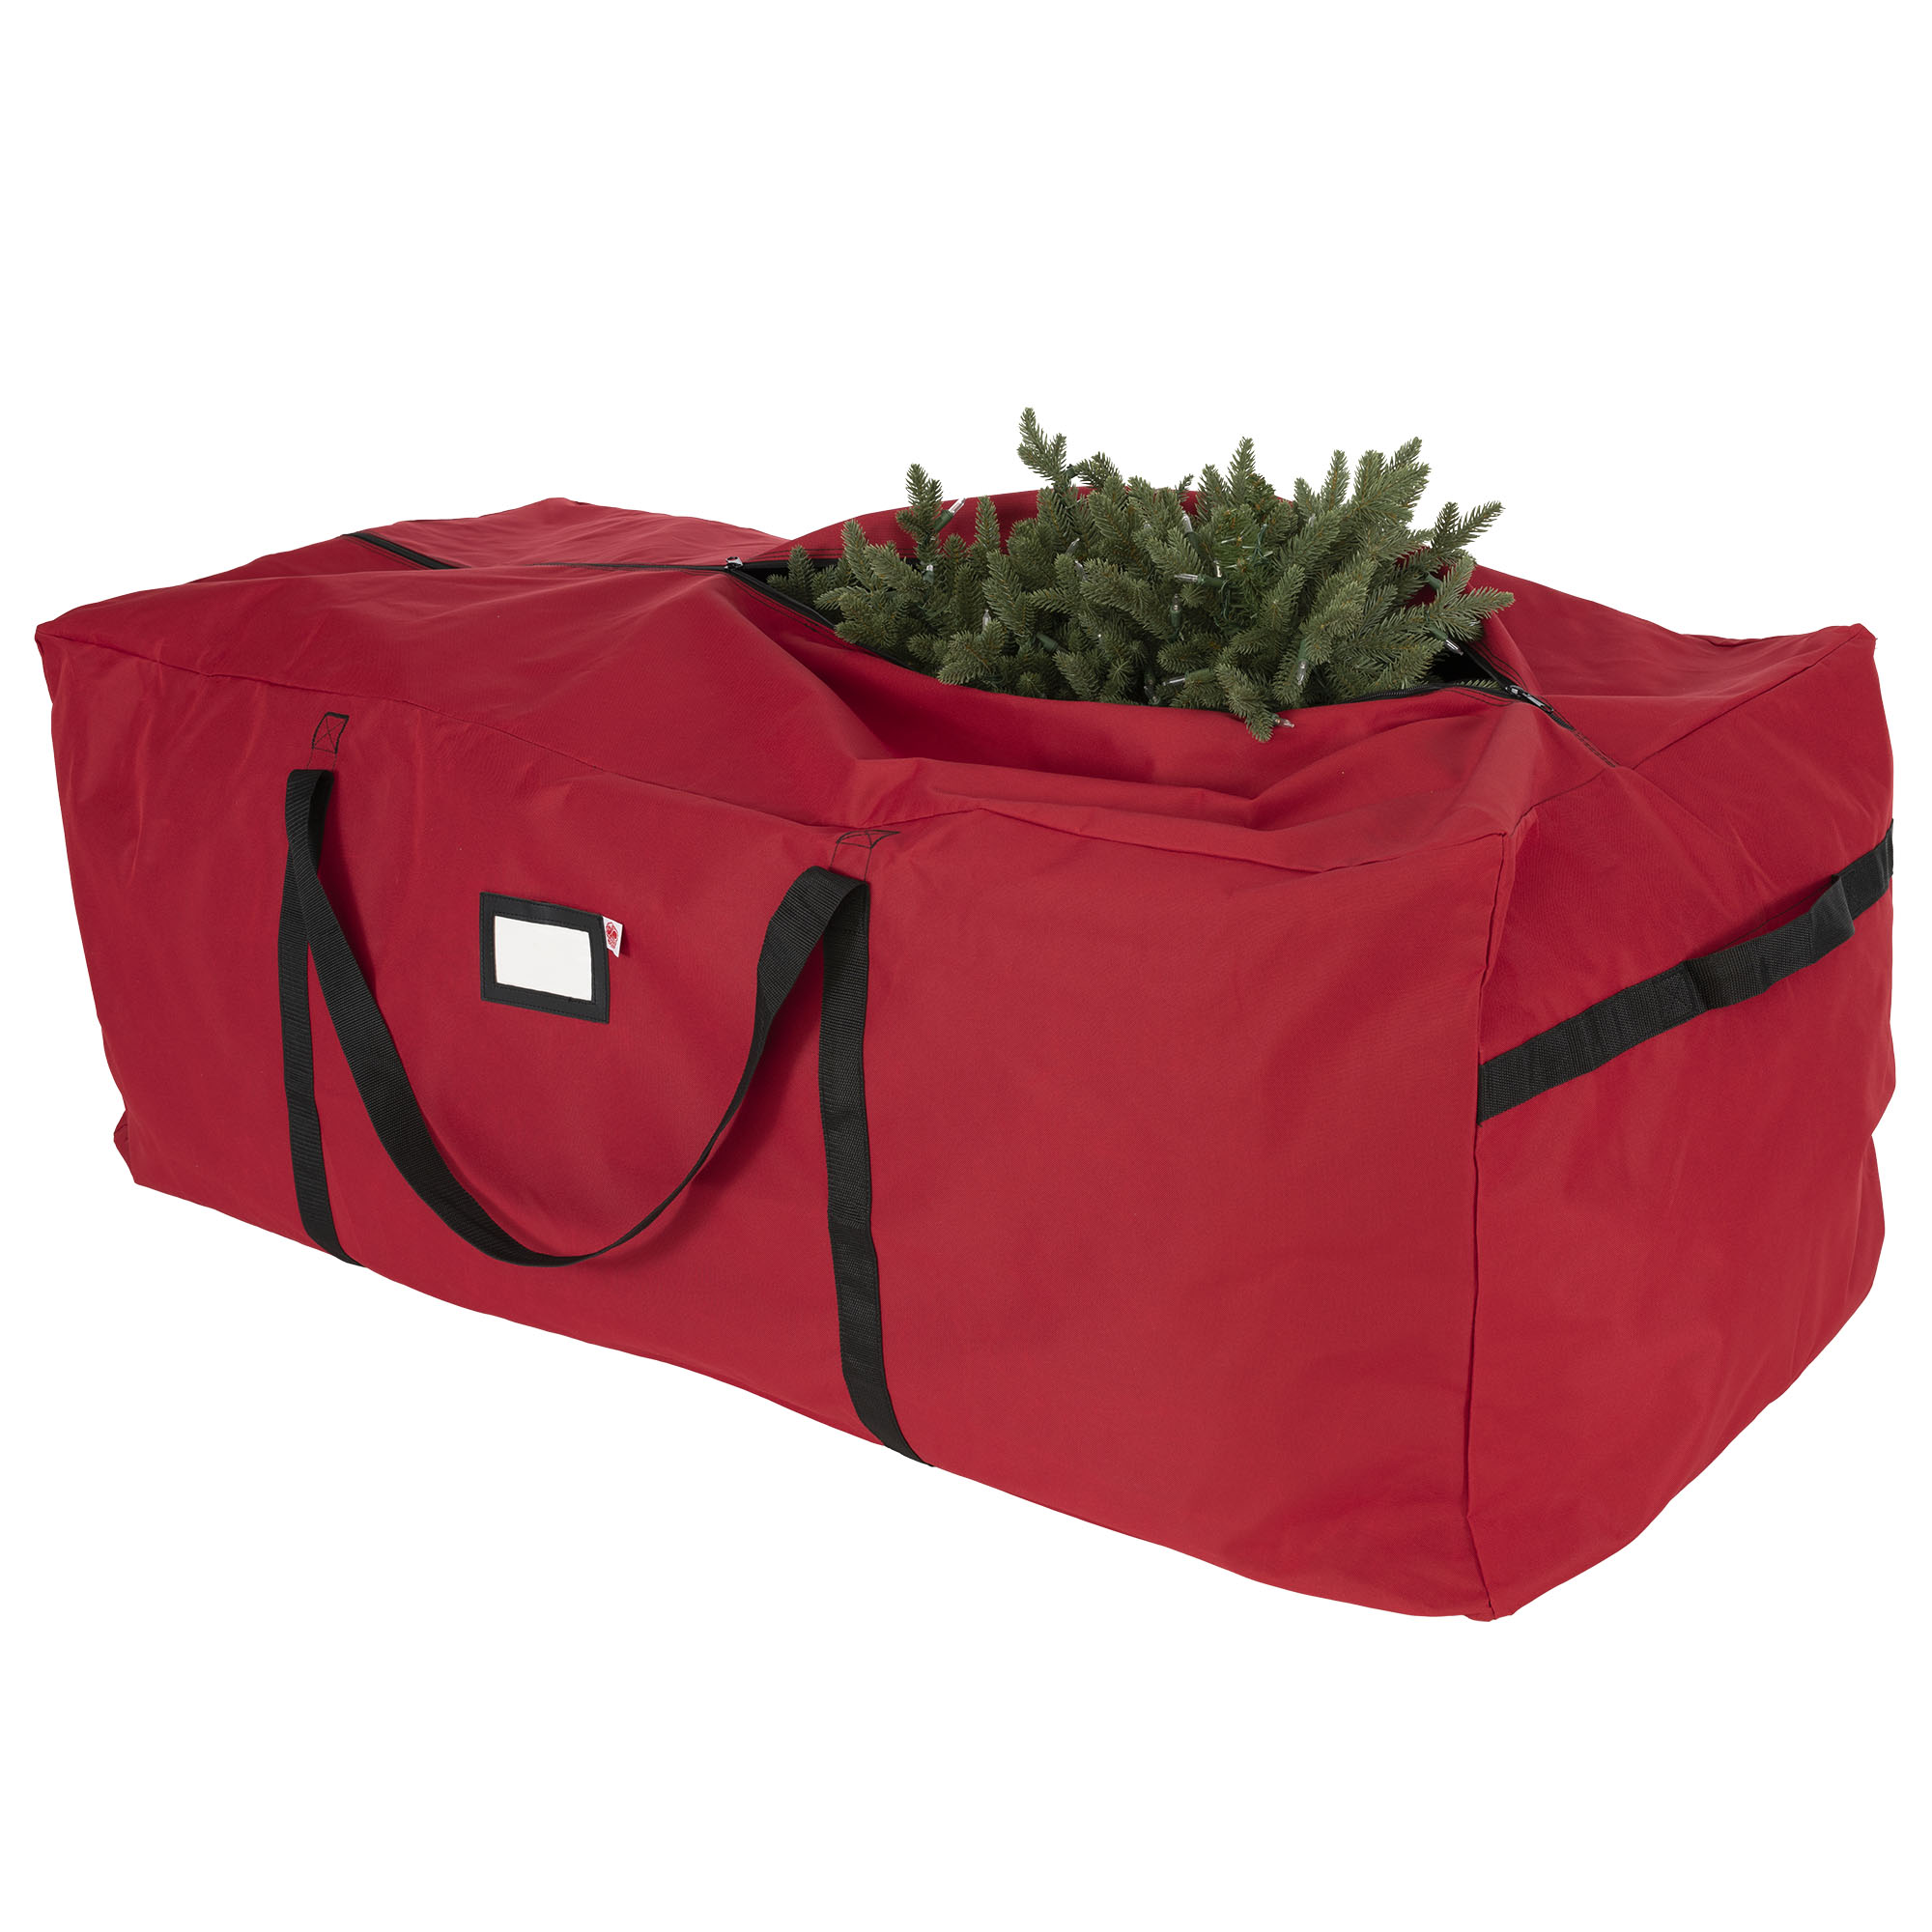 New Rubbermaid XL Wreath Storage Bag - general for sale - by owner